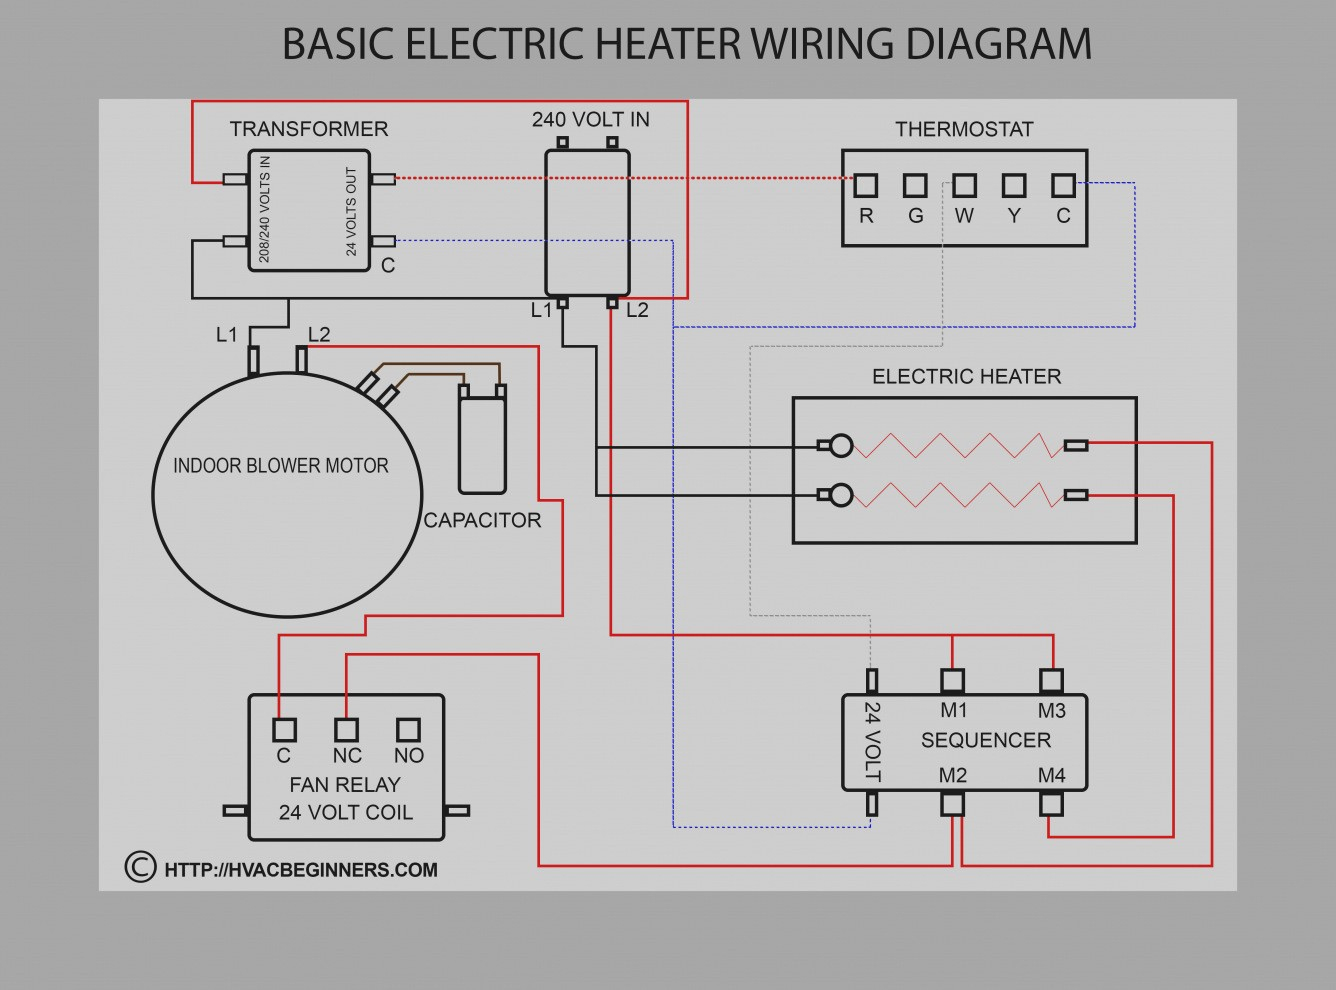 24V Fan Relay Wiring Diagram | Wiring Library - Heat Sequencer Wiring Diagram